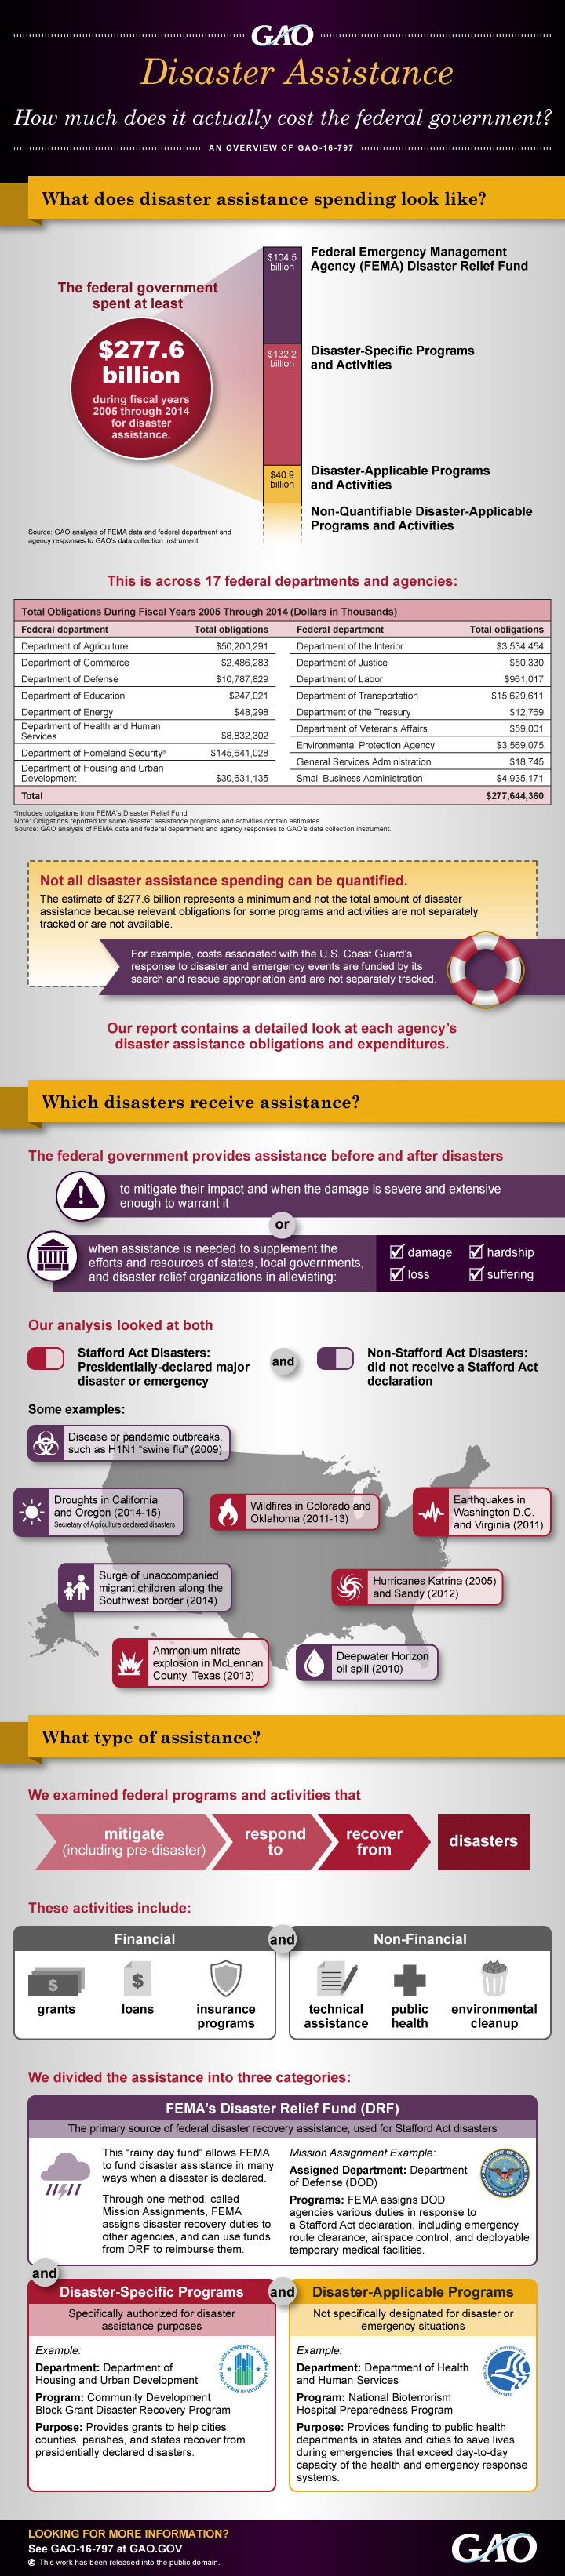 Disaster Assistance infographic